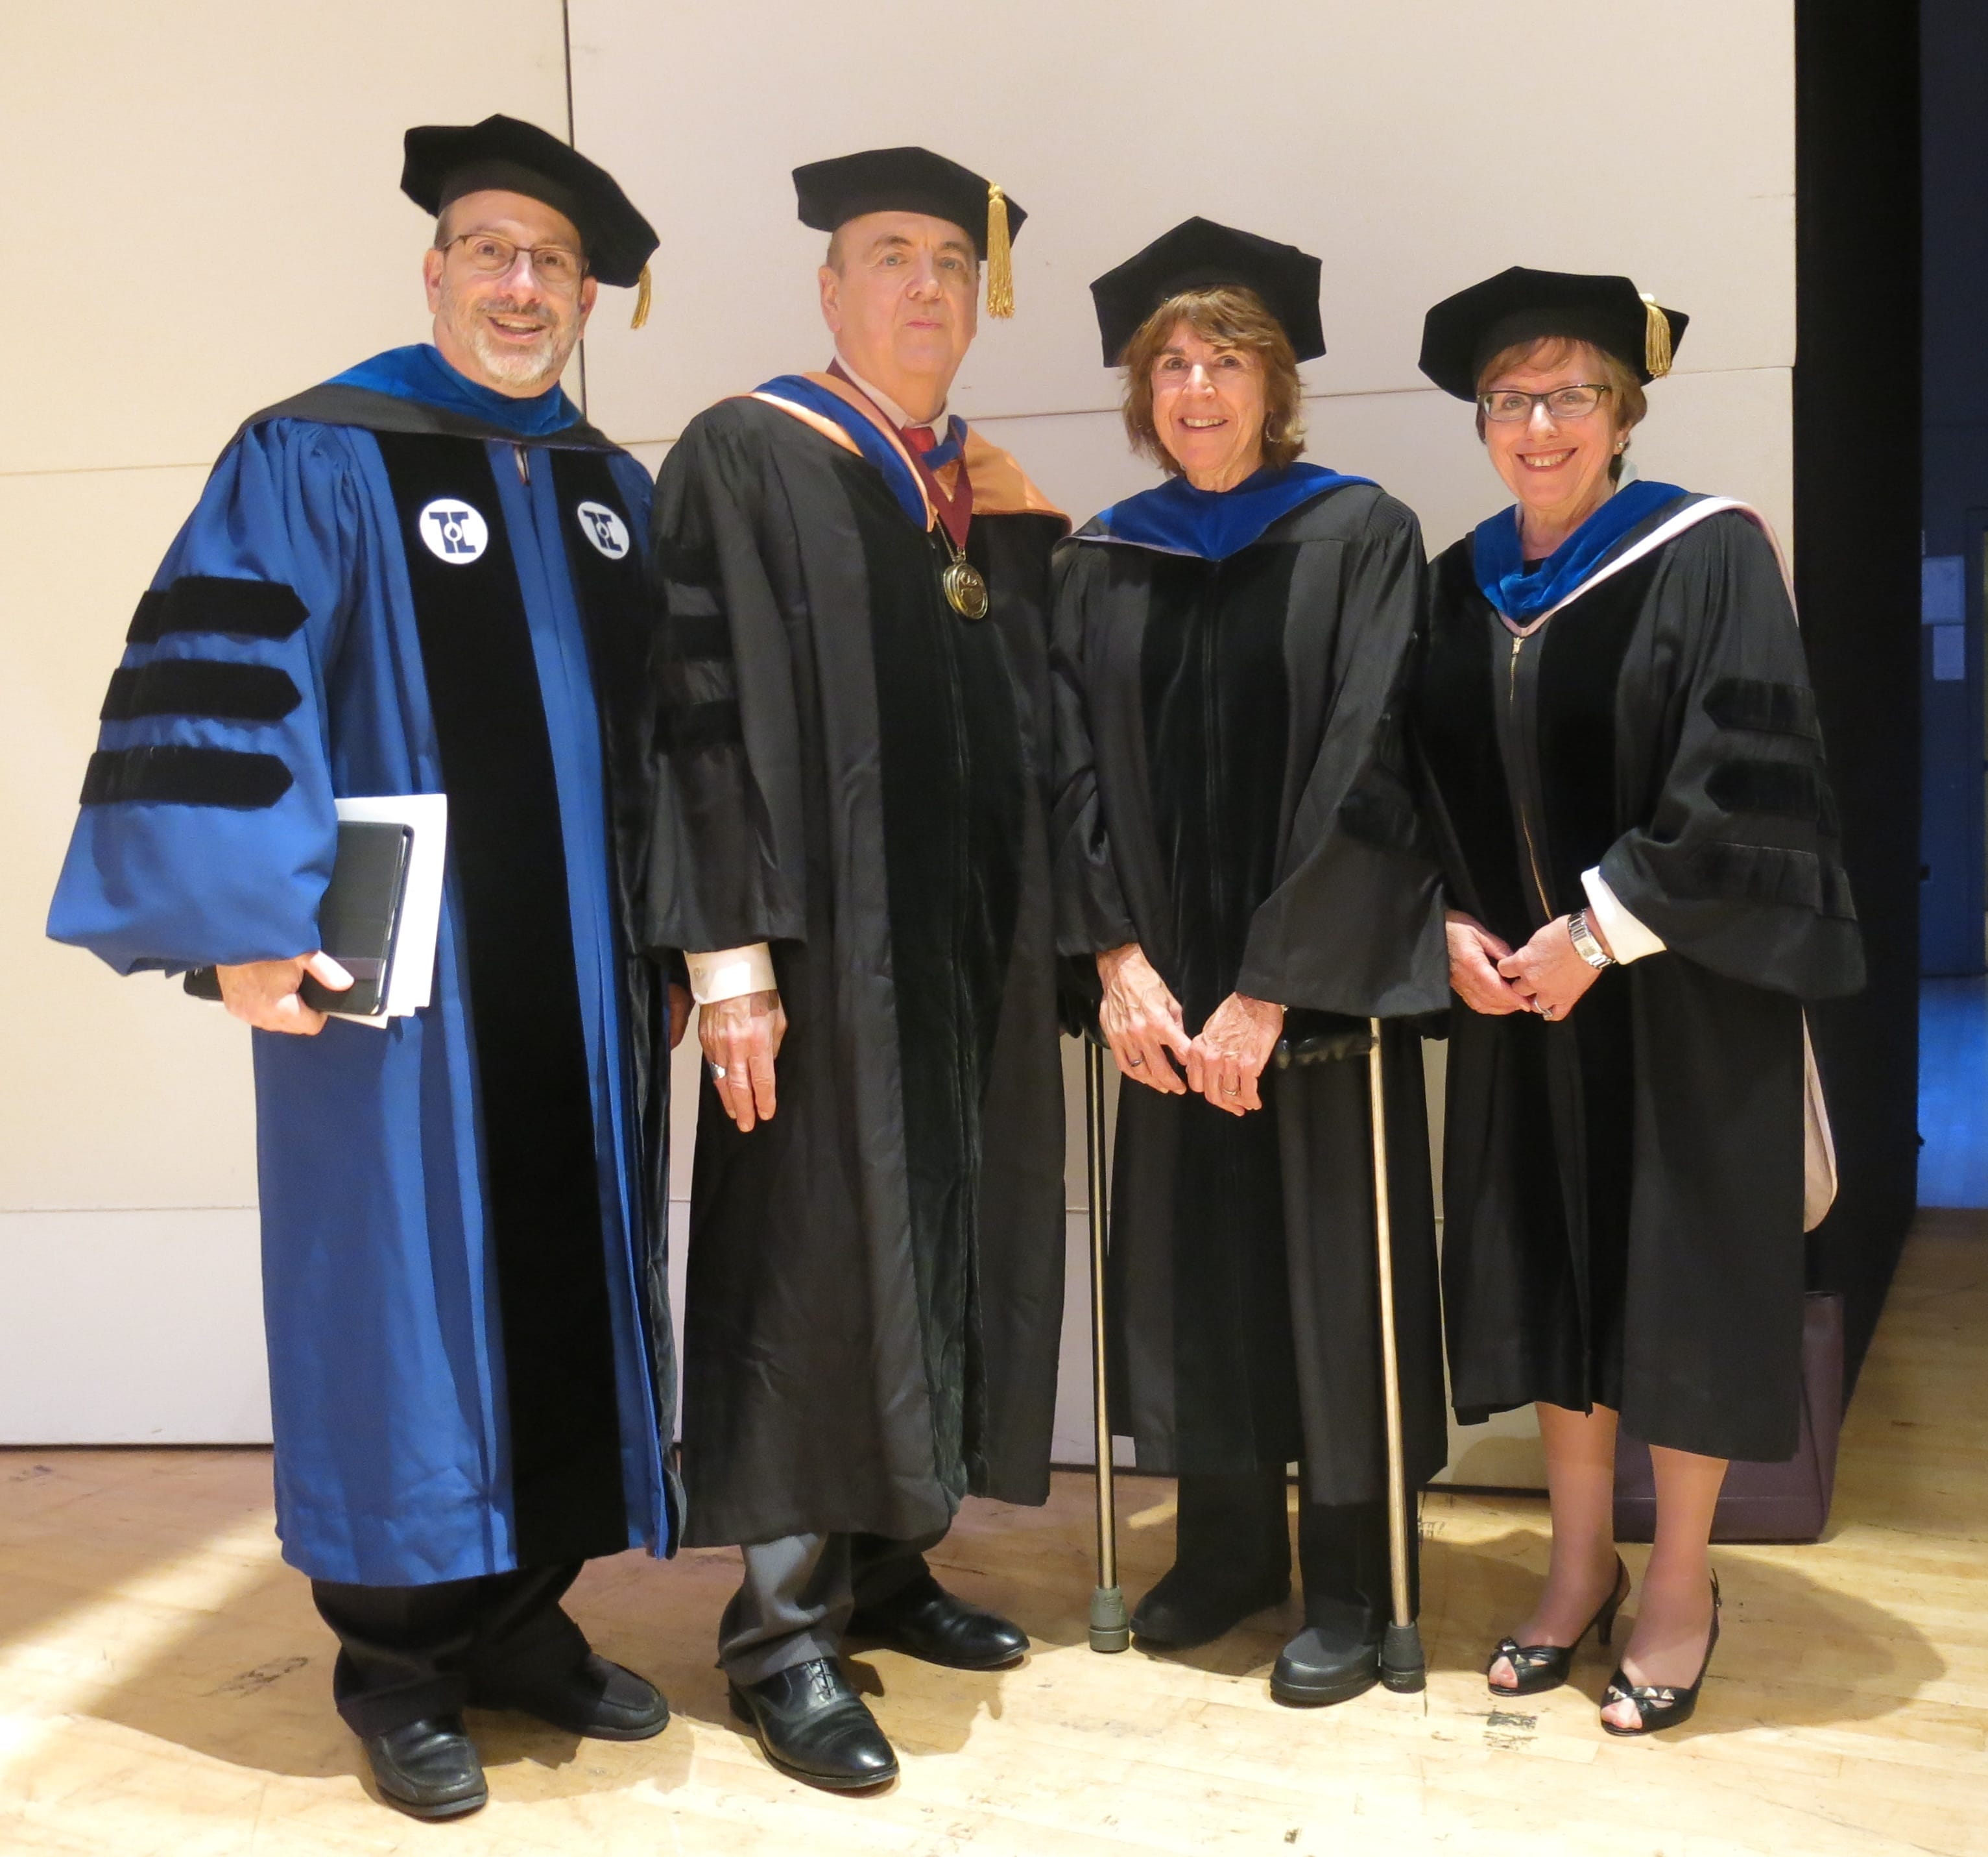 Rabbi Moshe Krupka, Dr. Louis Primavera, Dr. Maryanne Driscoll, and Dr. Nadja Graff, participated in Touro SHS commencement exercises in September. 